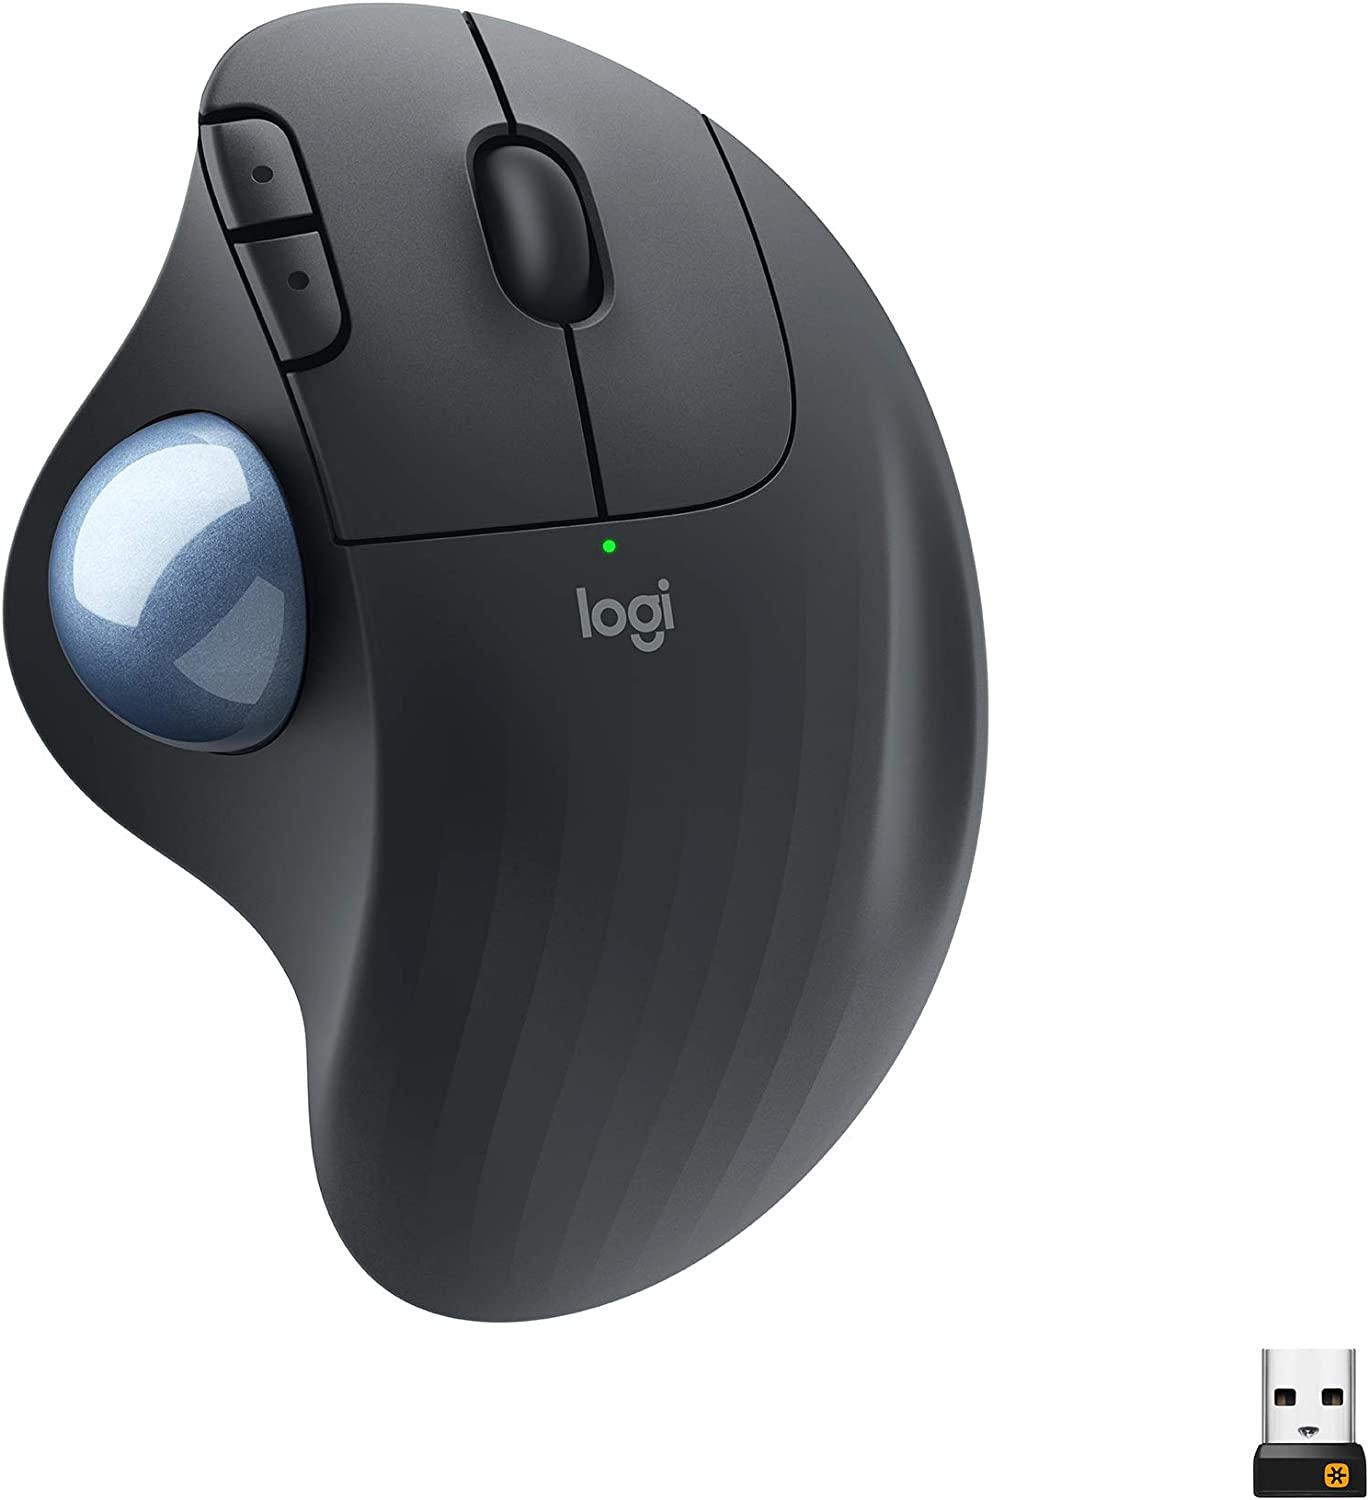 Logitech, Logitech Ergo M575 Wireless Trackball Mouse - Easy Thumb Control, Precision and Smooth Tracking, Ergonomic Comfort Design, for Windows, PC and Mac with Bluetooth and USB Capabilities - Black